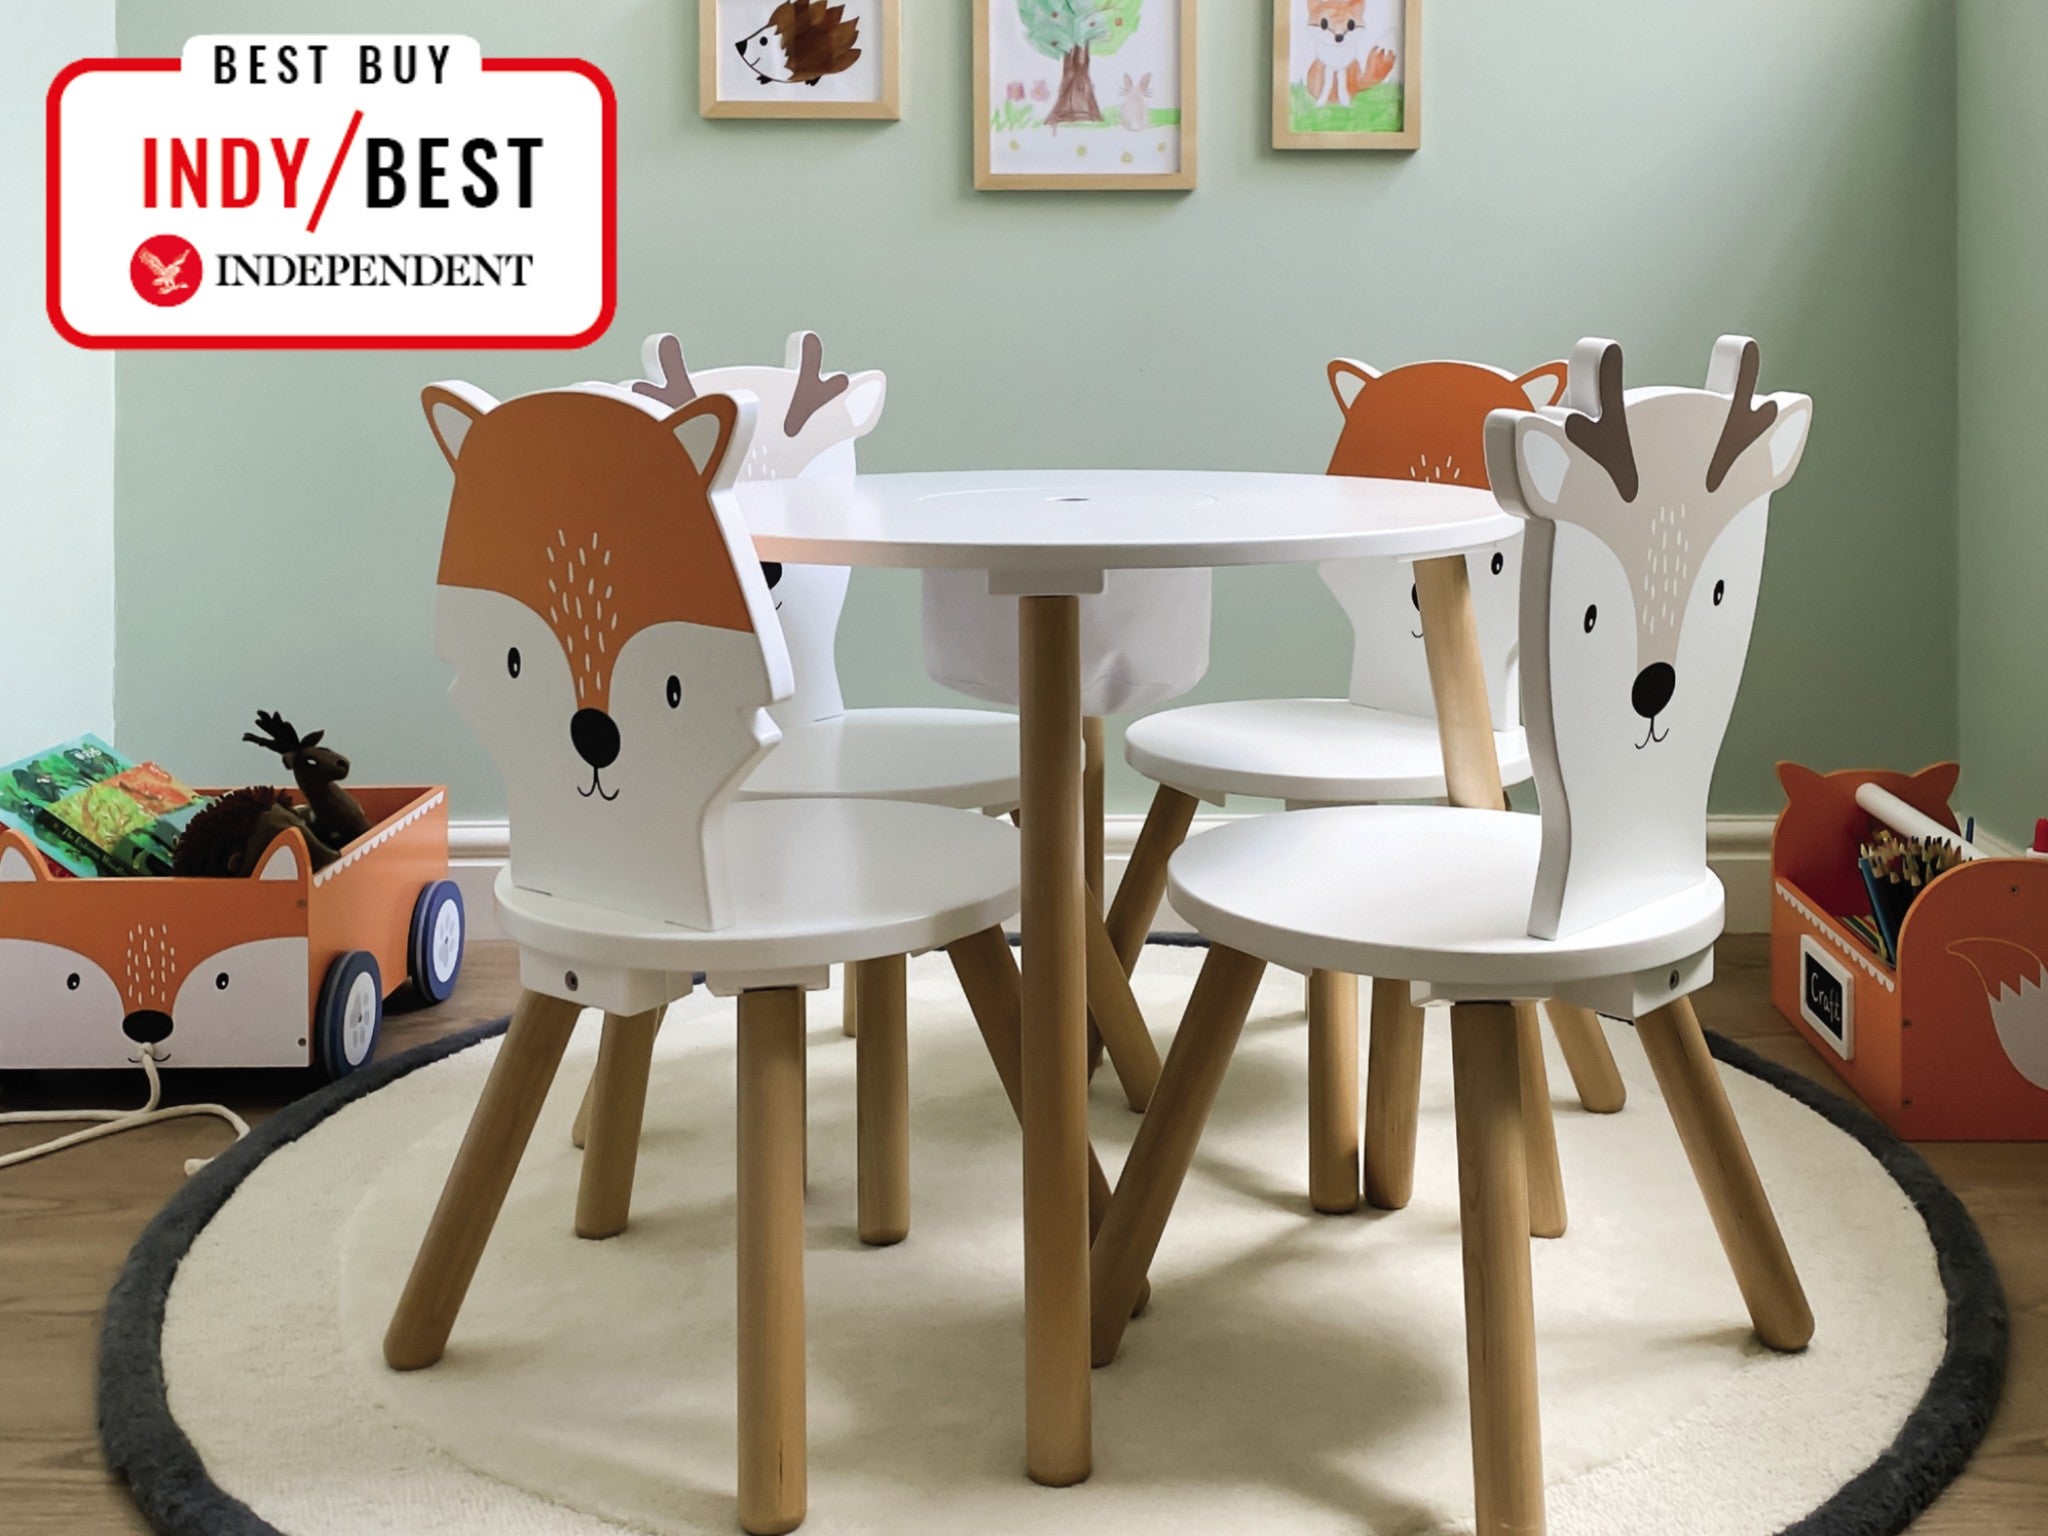 Children Comfortable Plastic Letter Study Table And 2 Chairs Sets Set For Kids 